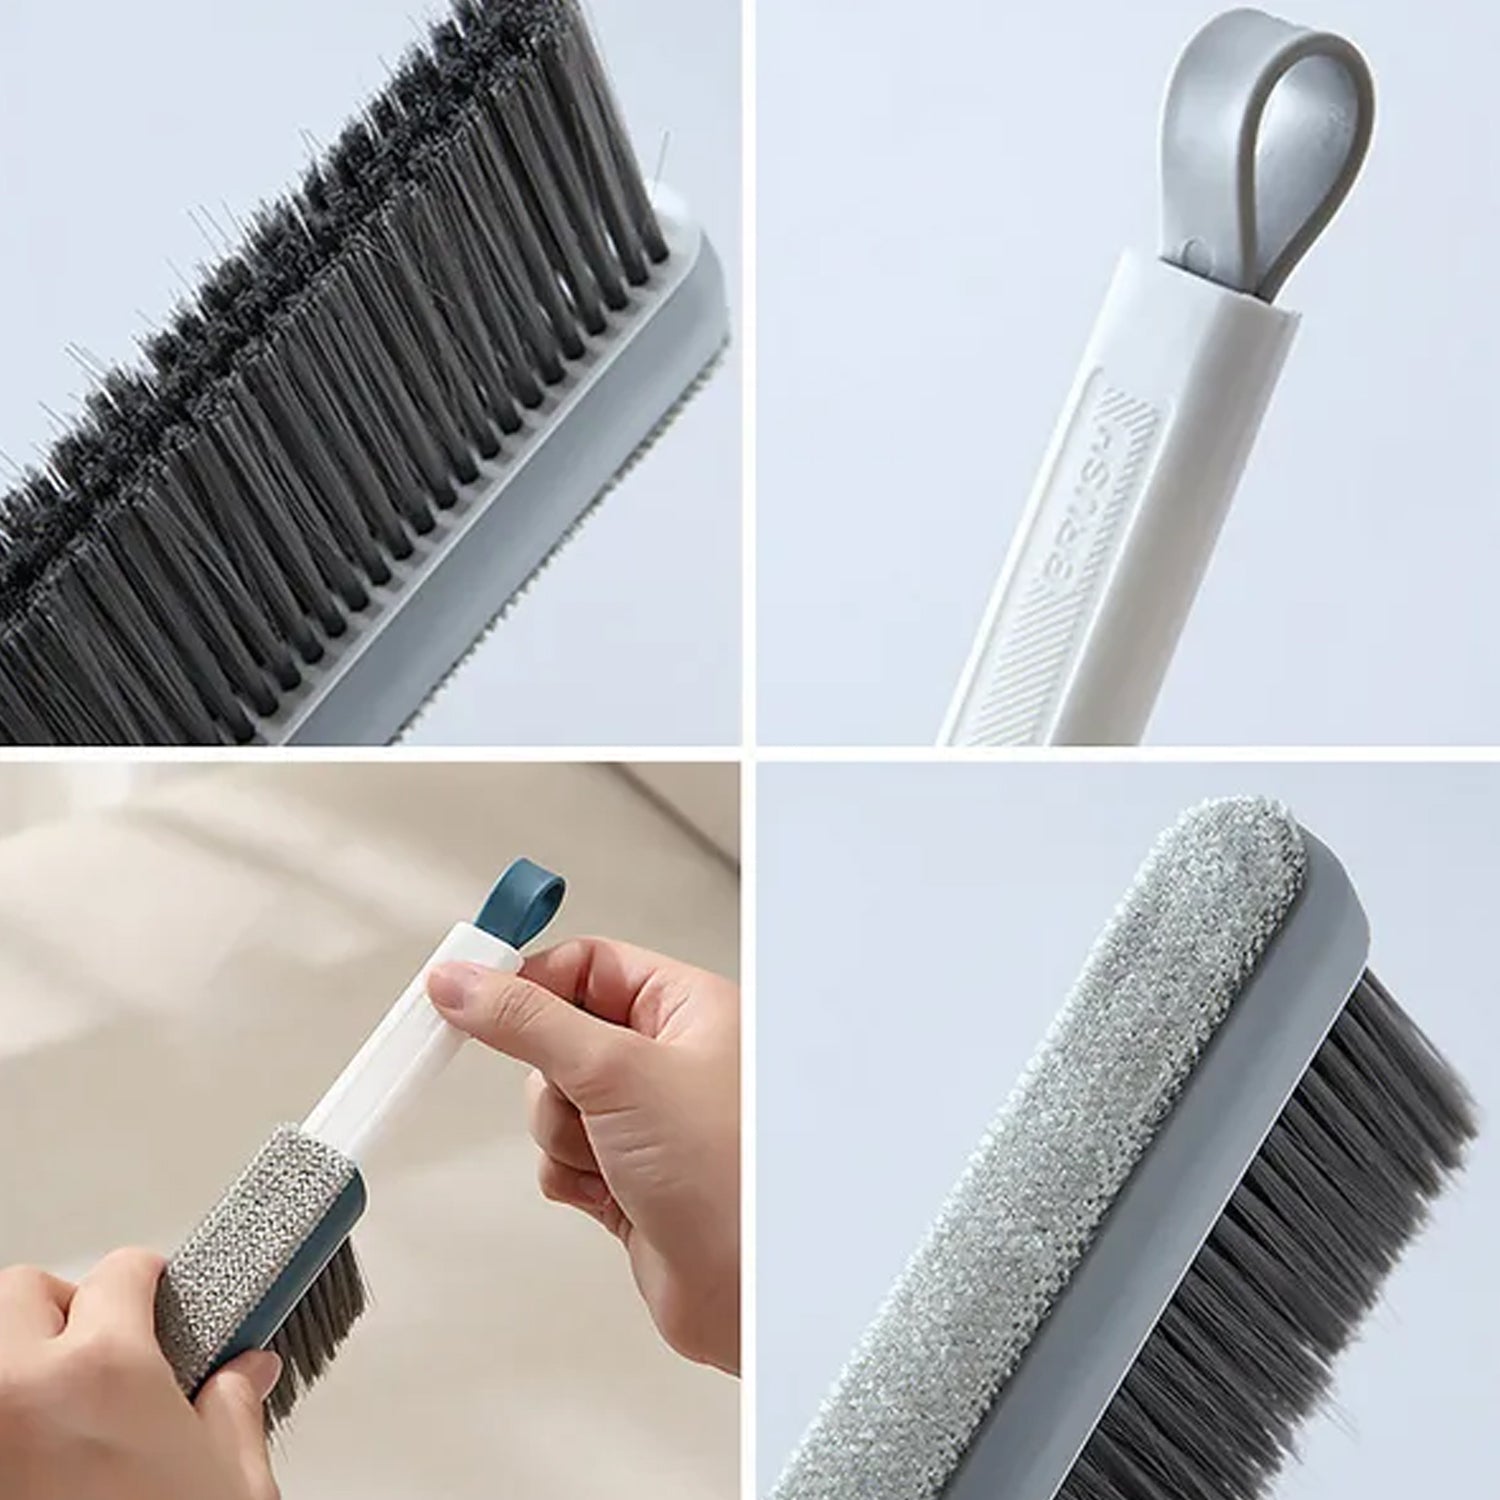 6619 Retractable Long-Handled Brush Household Cleaning Bed Sweeping Brush For Cleaning Car / Bed / Garden DeoDap